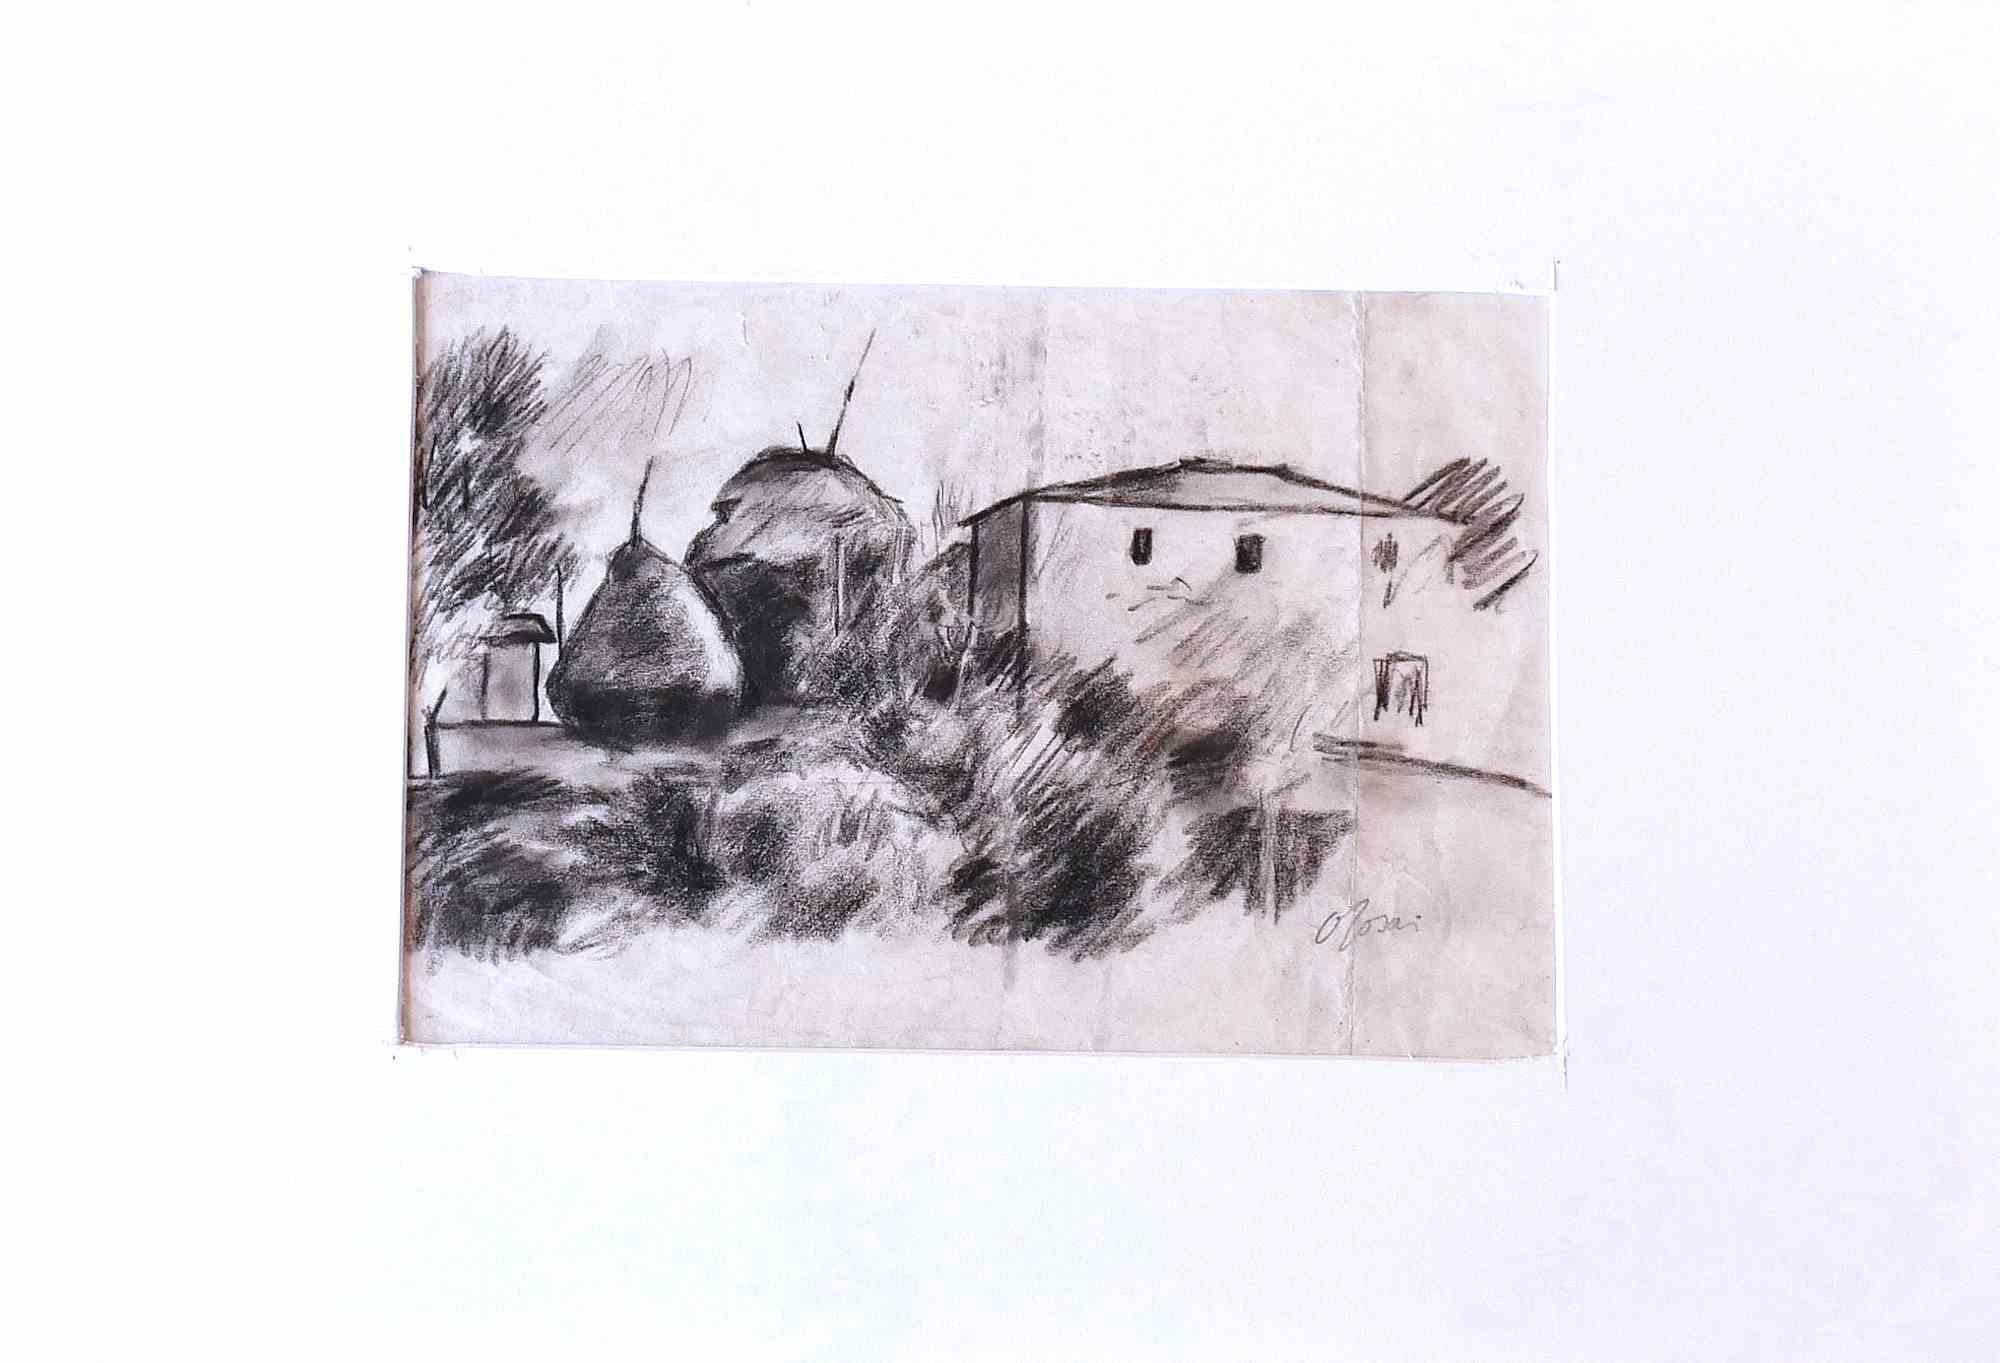 Unknown Landscape Art - The Village - Original Drawing in Charcoal - Mid-20th Century